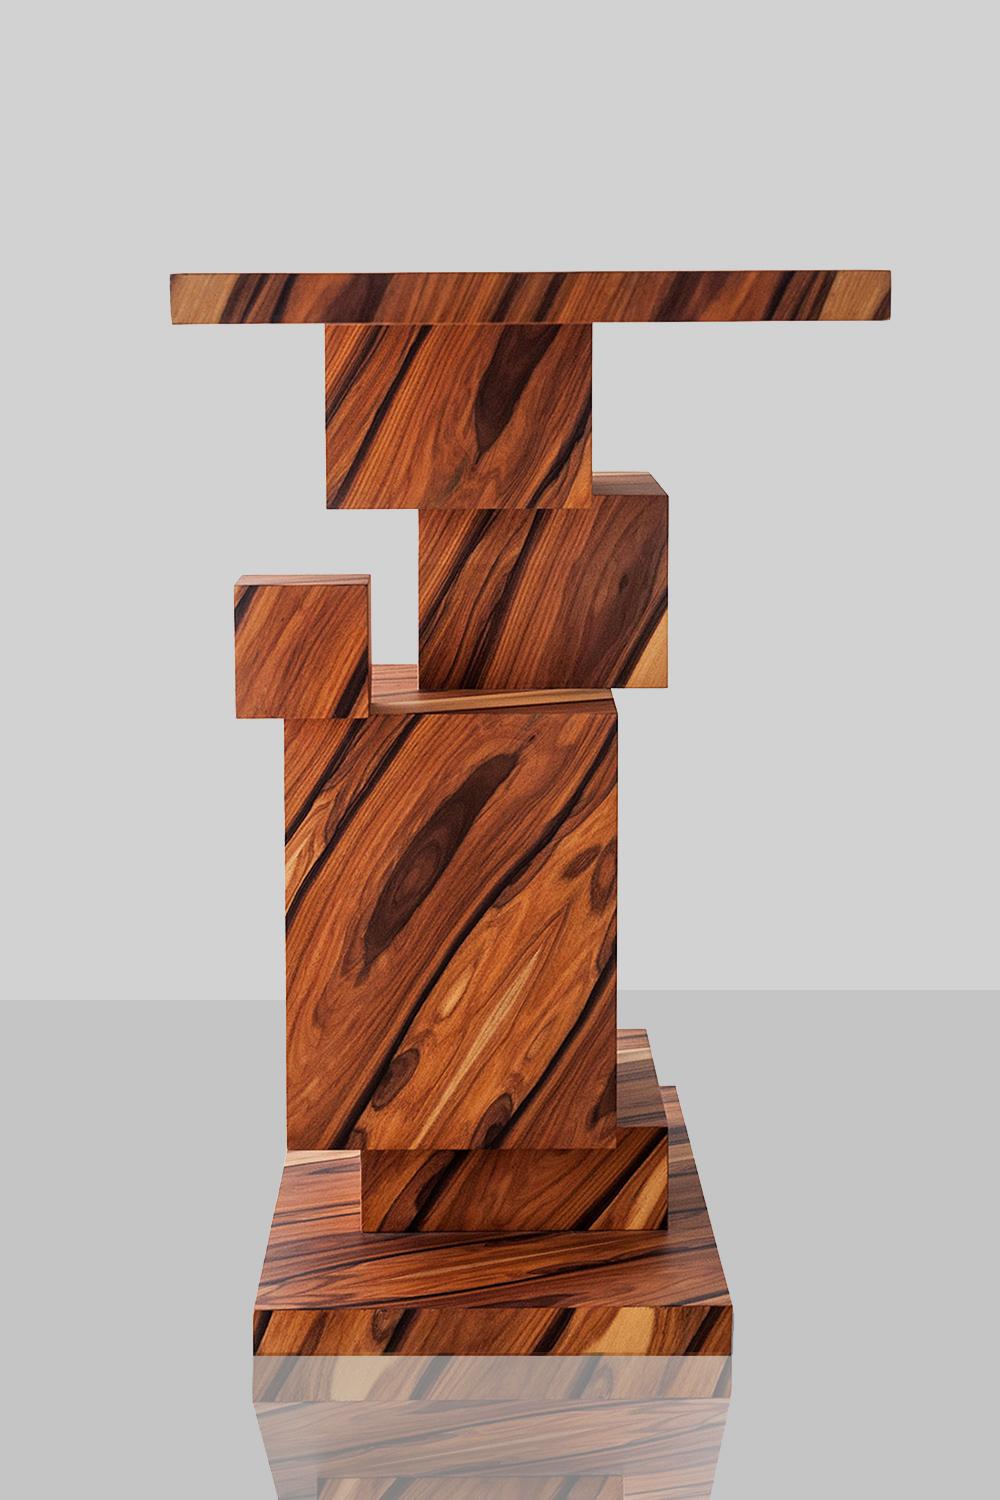 Alma Console Made of Palo Santo Wood, Limited Edition of 7- Contemporary Design 2